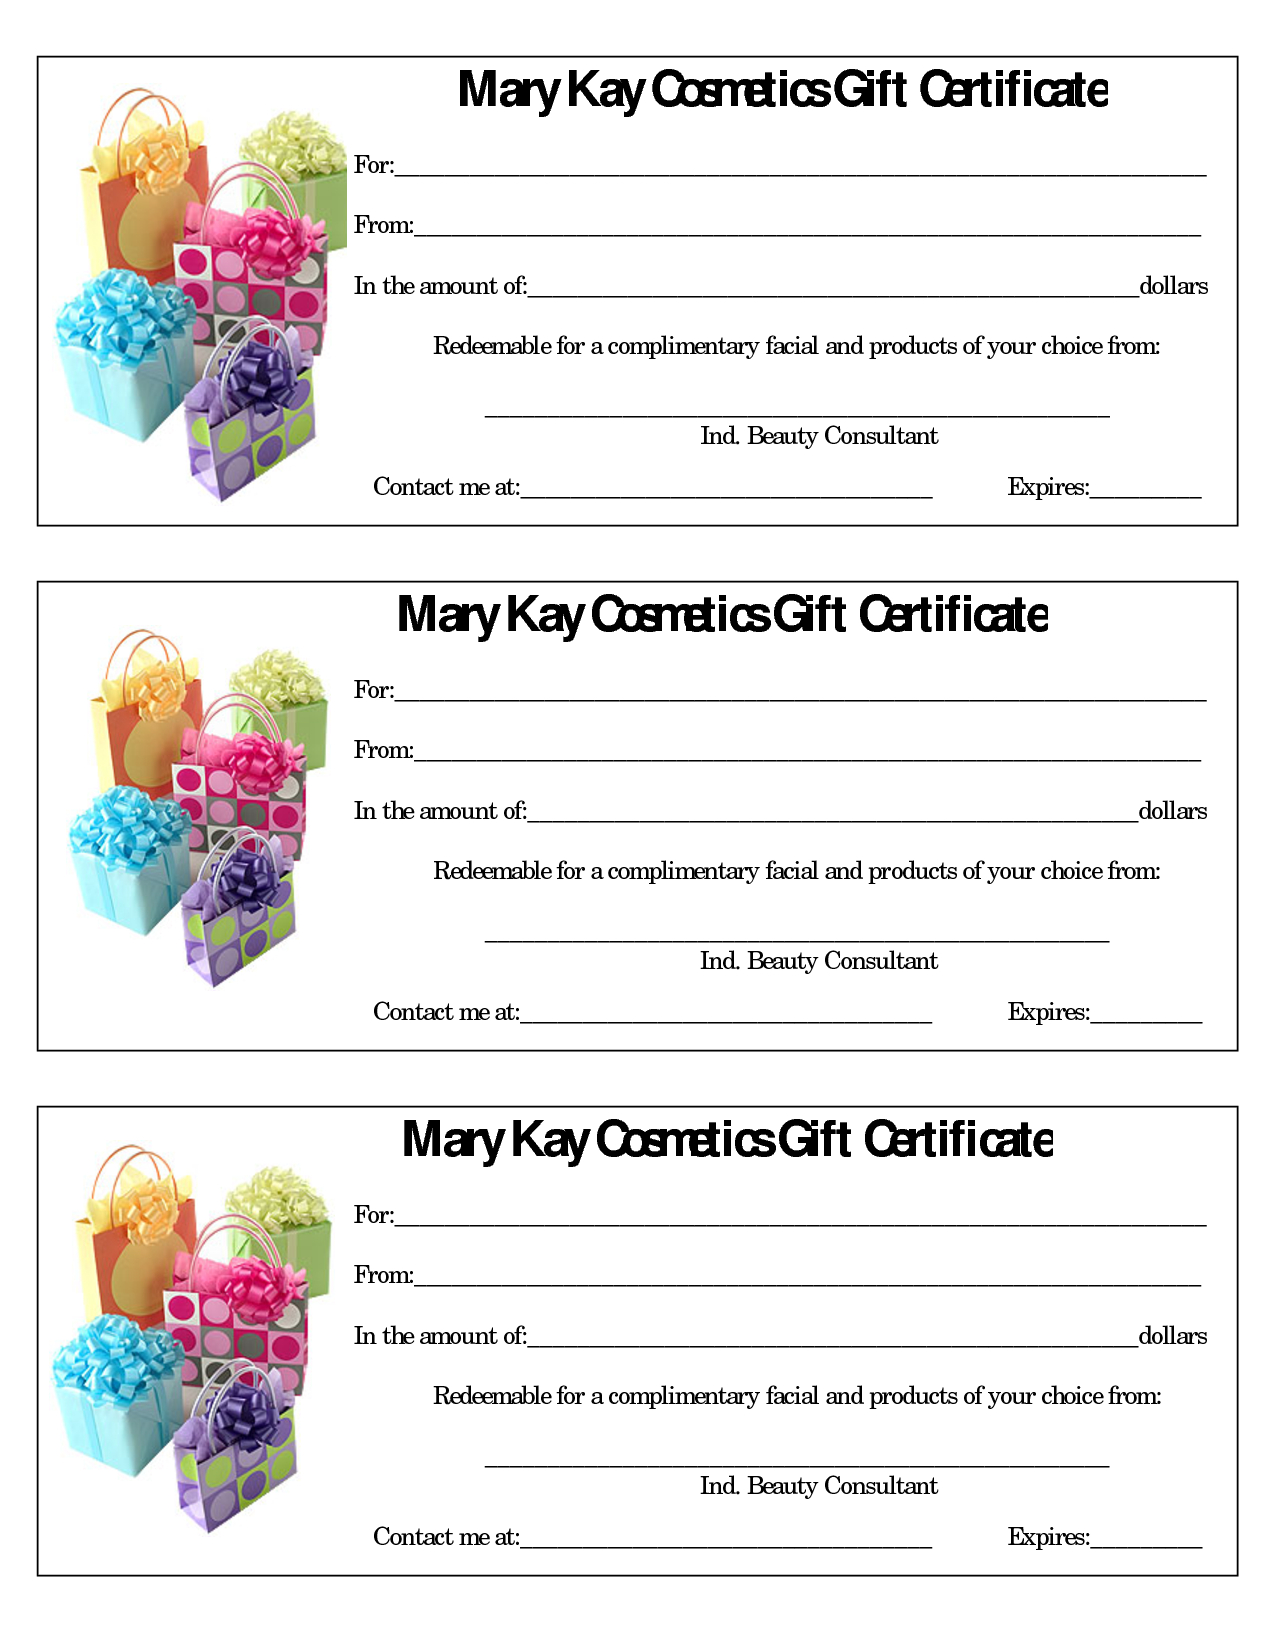 Mary Kay Certificate.636 448 4191. Seckhoff1@marykay Pertaining To Mary Kay Gift Certificate Template